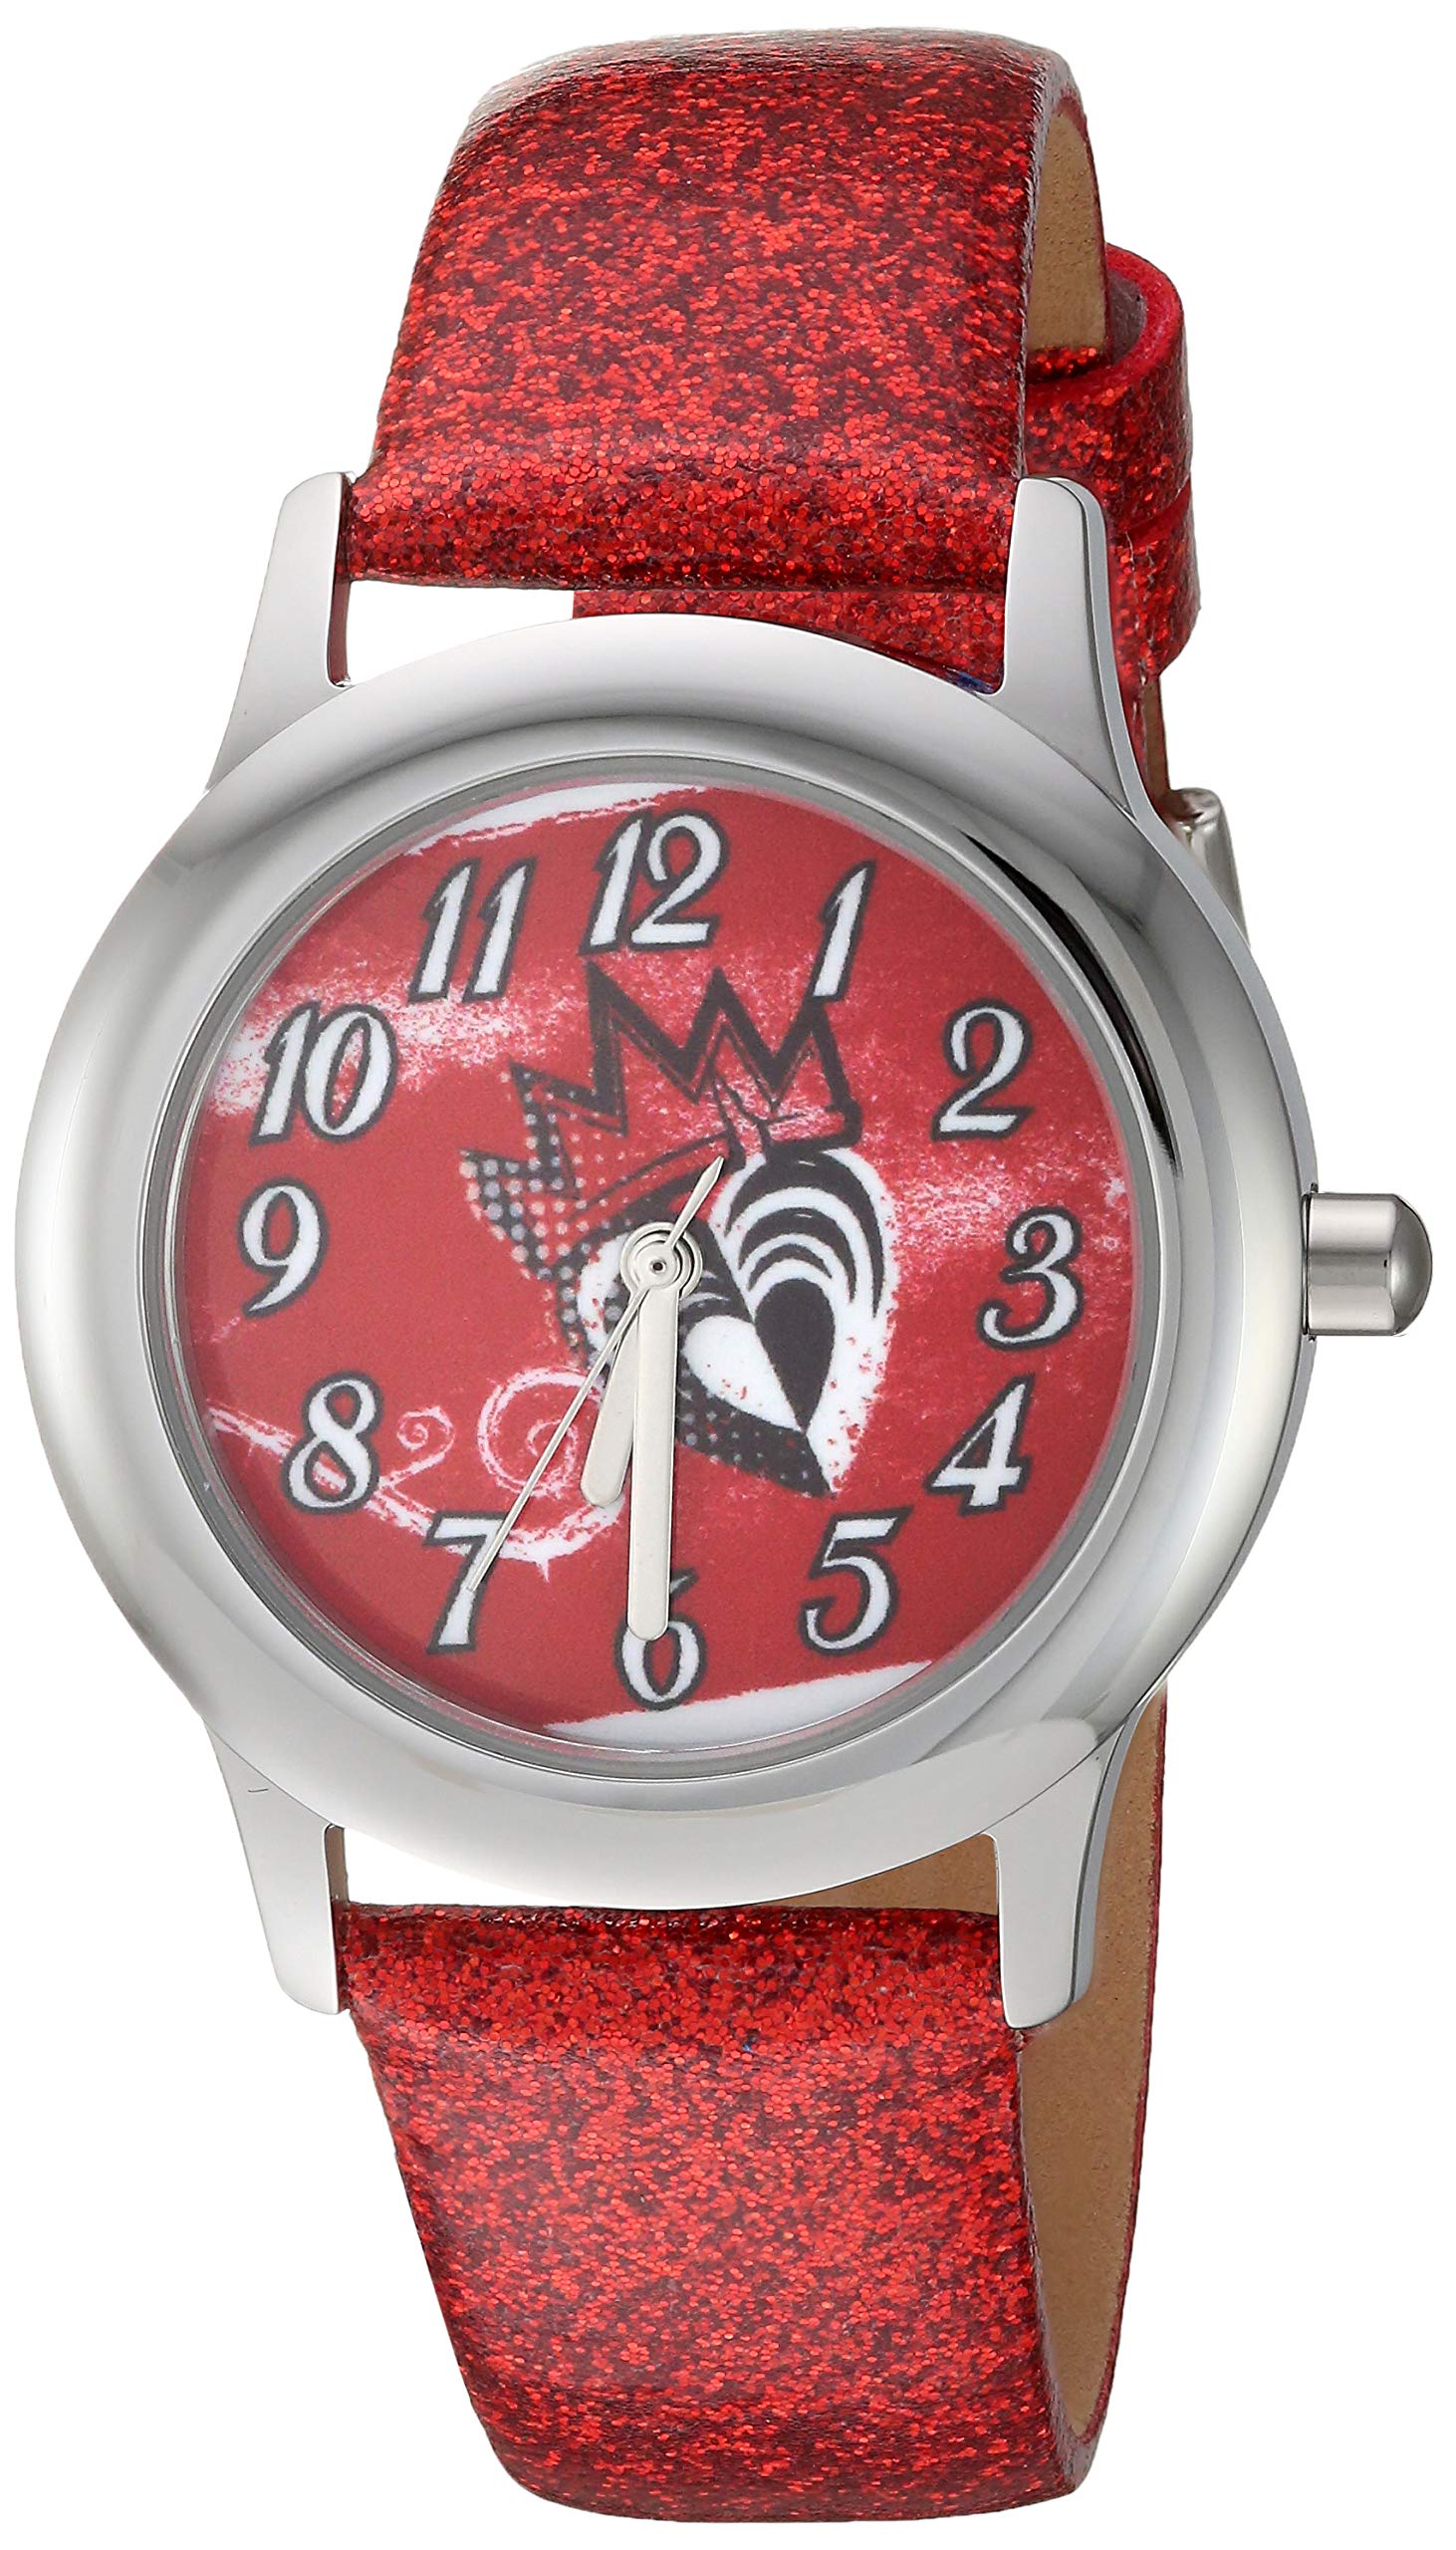 Disney Descendants 3 Girl's Stainless Steel Watch, Red Glitter Leather Strap, WDS000767